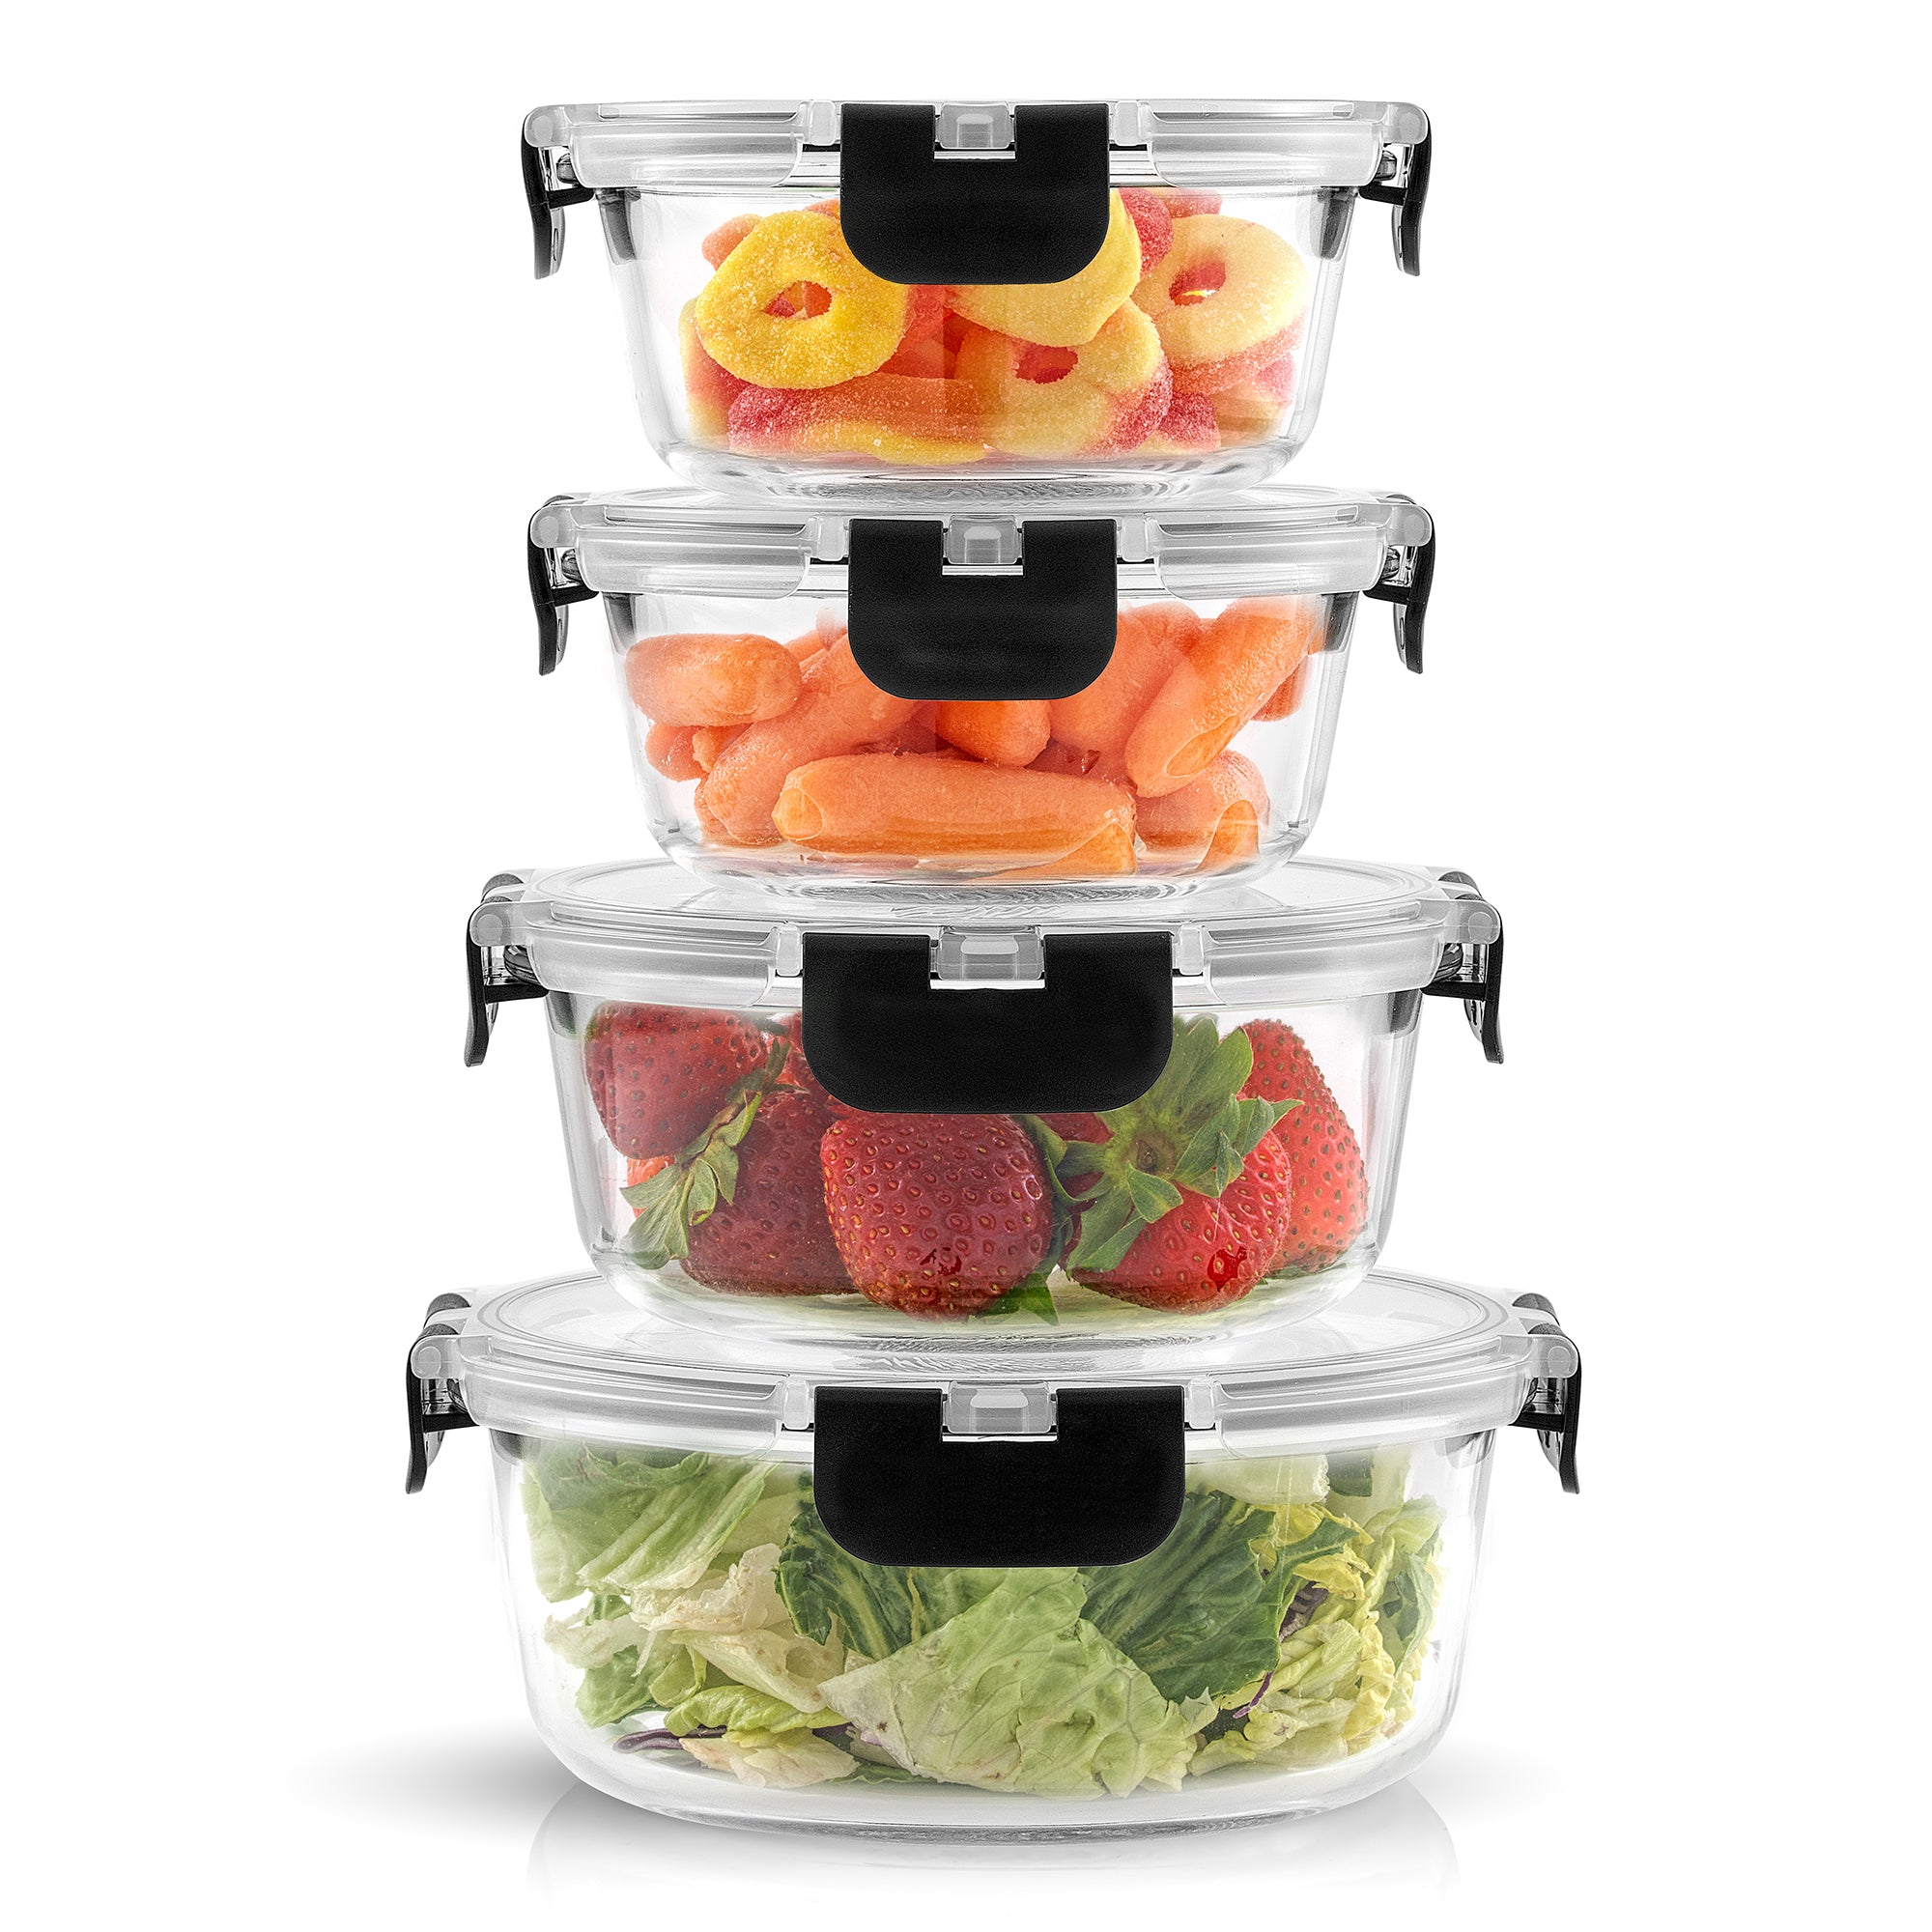 JoyFul 12 Glass Storage Containers with Leakproof Lids Set